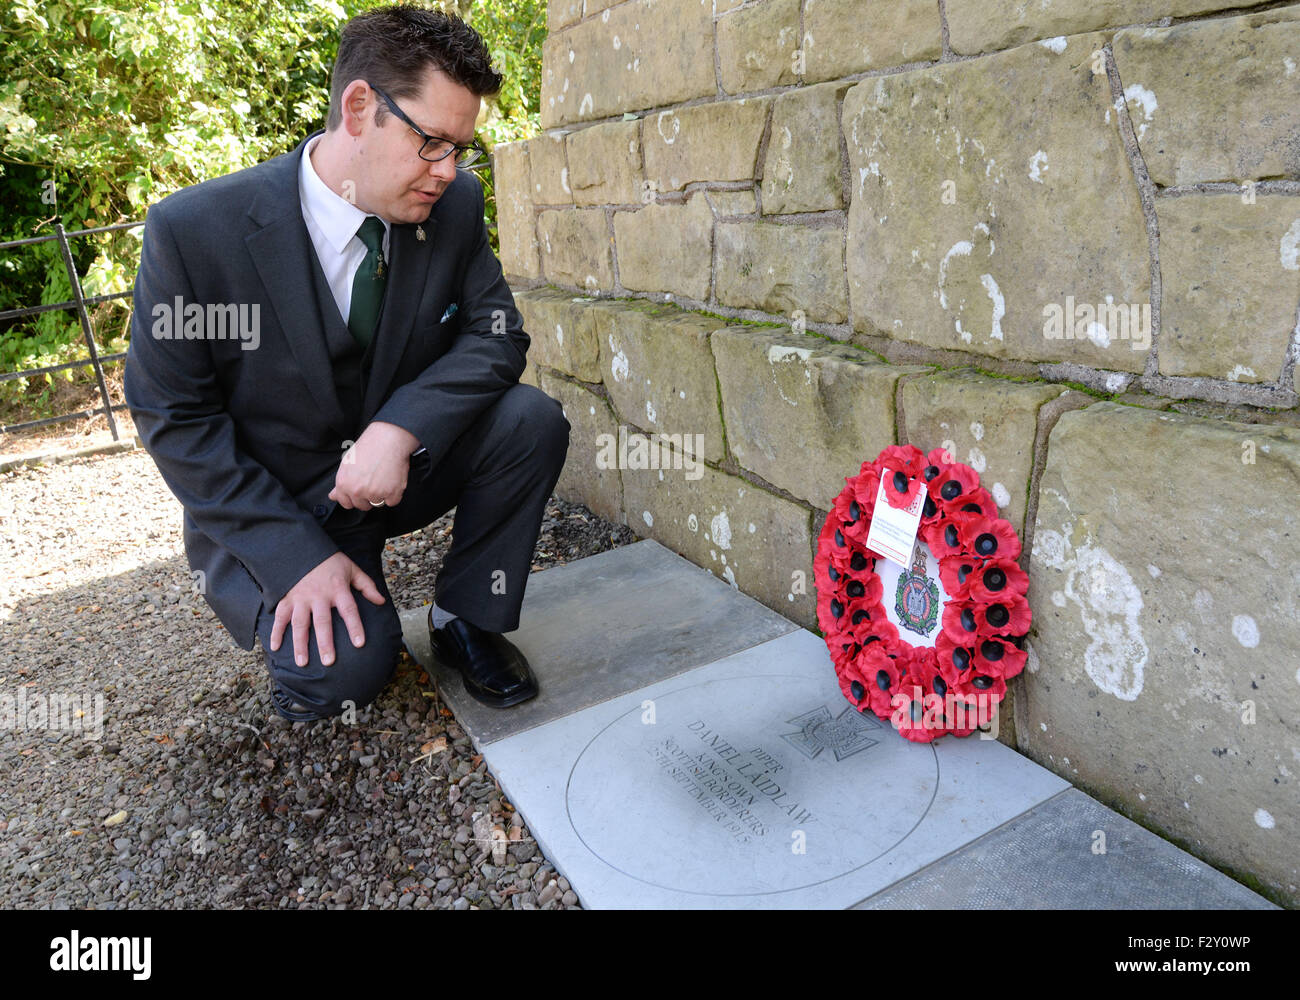 Swinton, UK. 25th Sep, 2015. Kevin Laidlaw studying the commerative VC Stone laid in honour of his Great Grandfather.   The Laying of the Commerative VC Stone in the small Scottish Border village of Swinton to mark the 100th Anniversary of the award of the Victoria Cross to Piper Daniel Laidlaw for his actions whilst serving with the 7th Battalion of the King's Own Scottish Borderers.   Daniel Logan Laidlaw was born at Little Swinton, Berwickshire on 26 July 1875 and joined the Army in 1896. Stock Photo